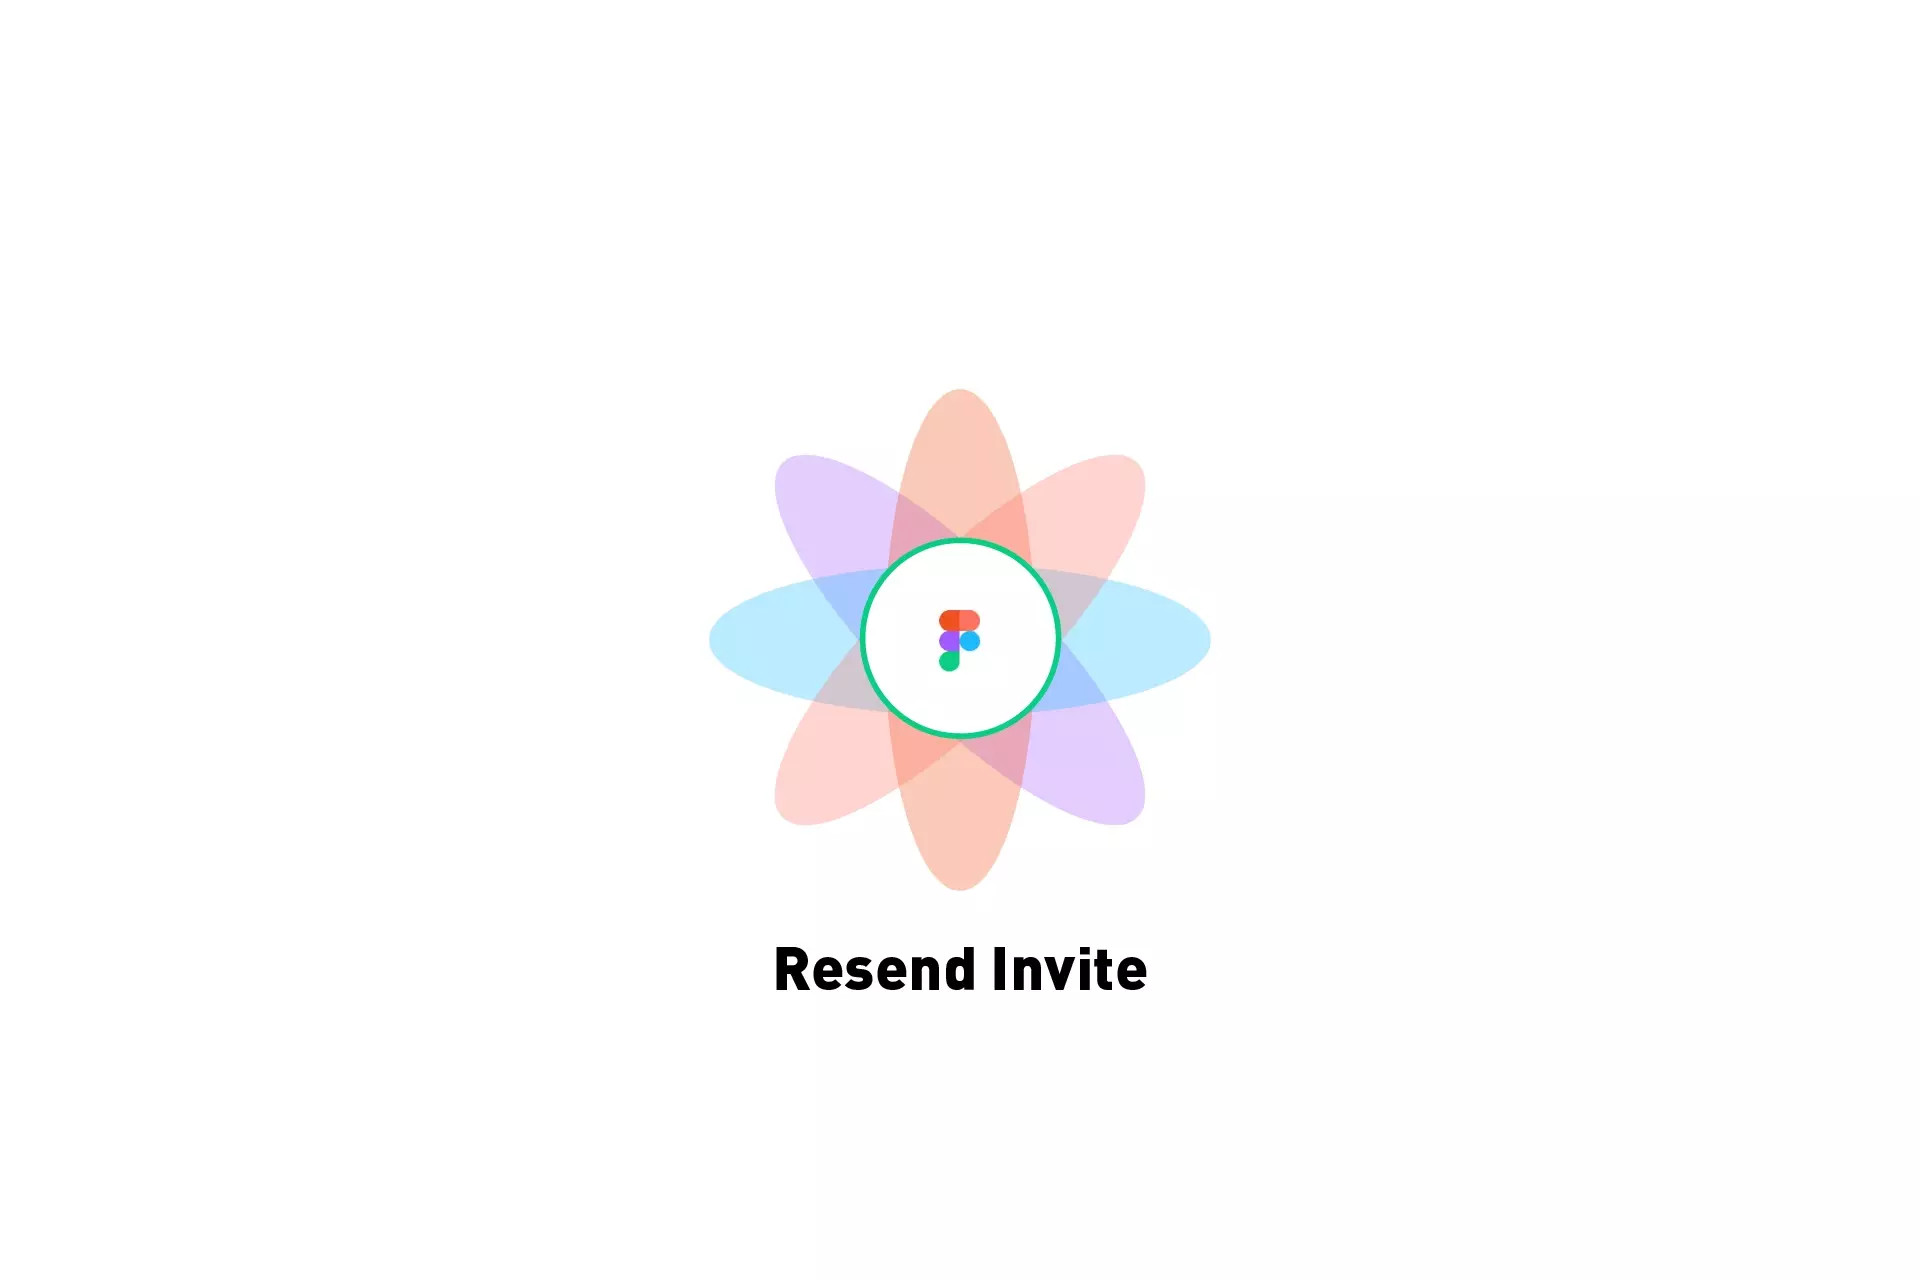 A flower that represents Figma with the text "Resend Invite" beneath it.